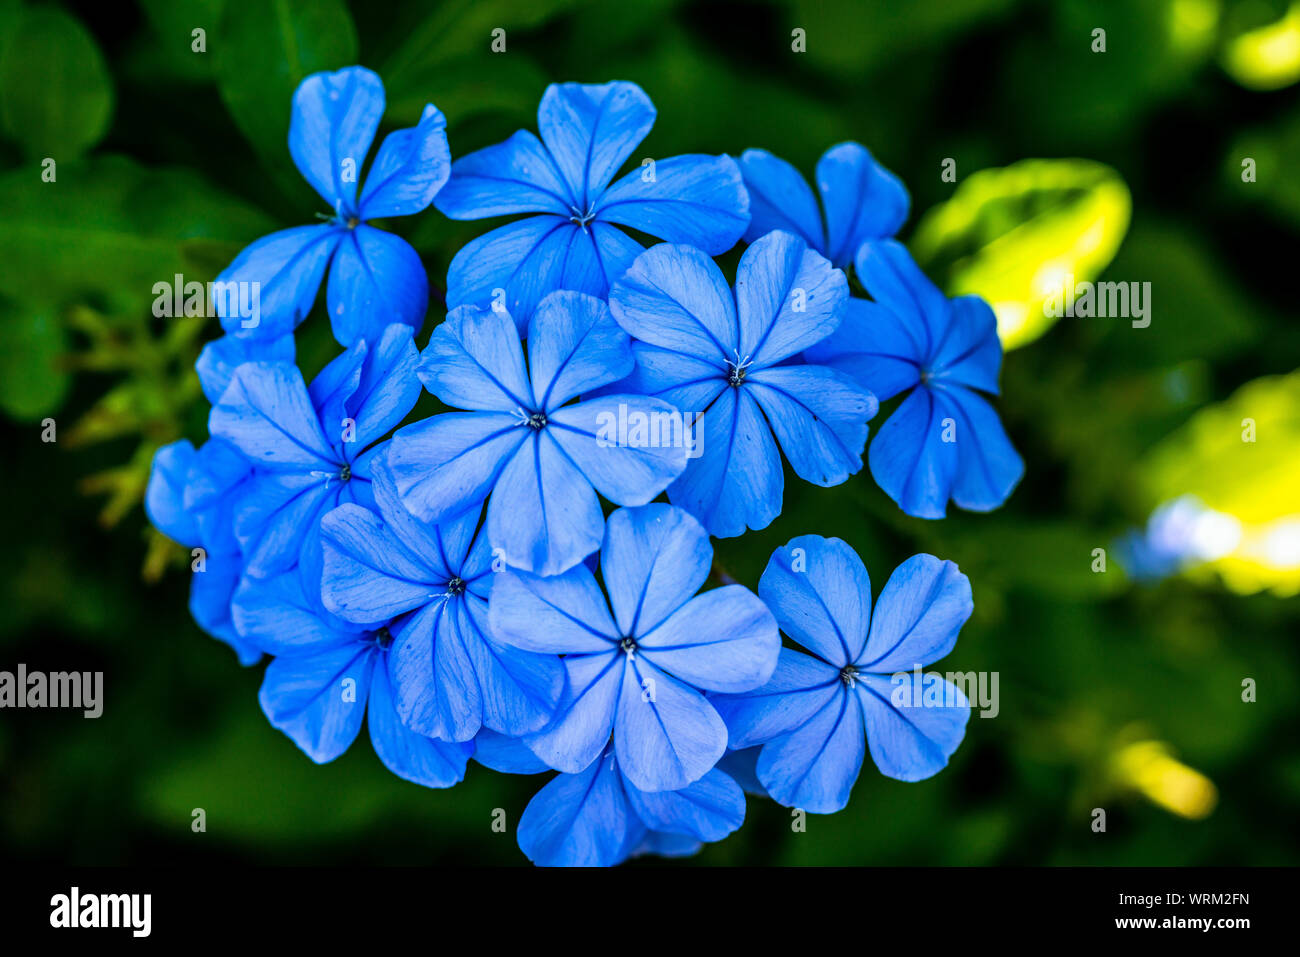 Flowers are nature's beauty in all colors, shapes, and sizes. Stock Photo